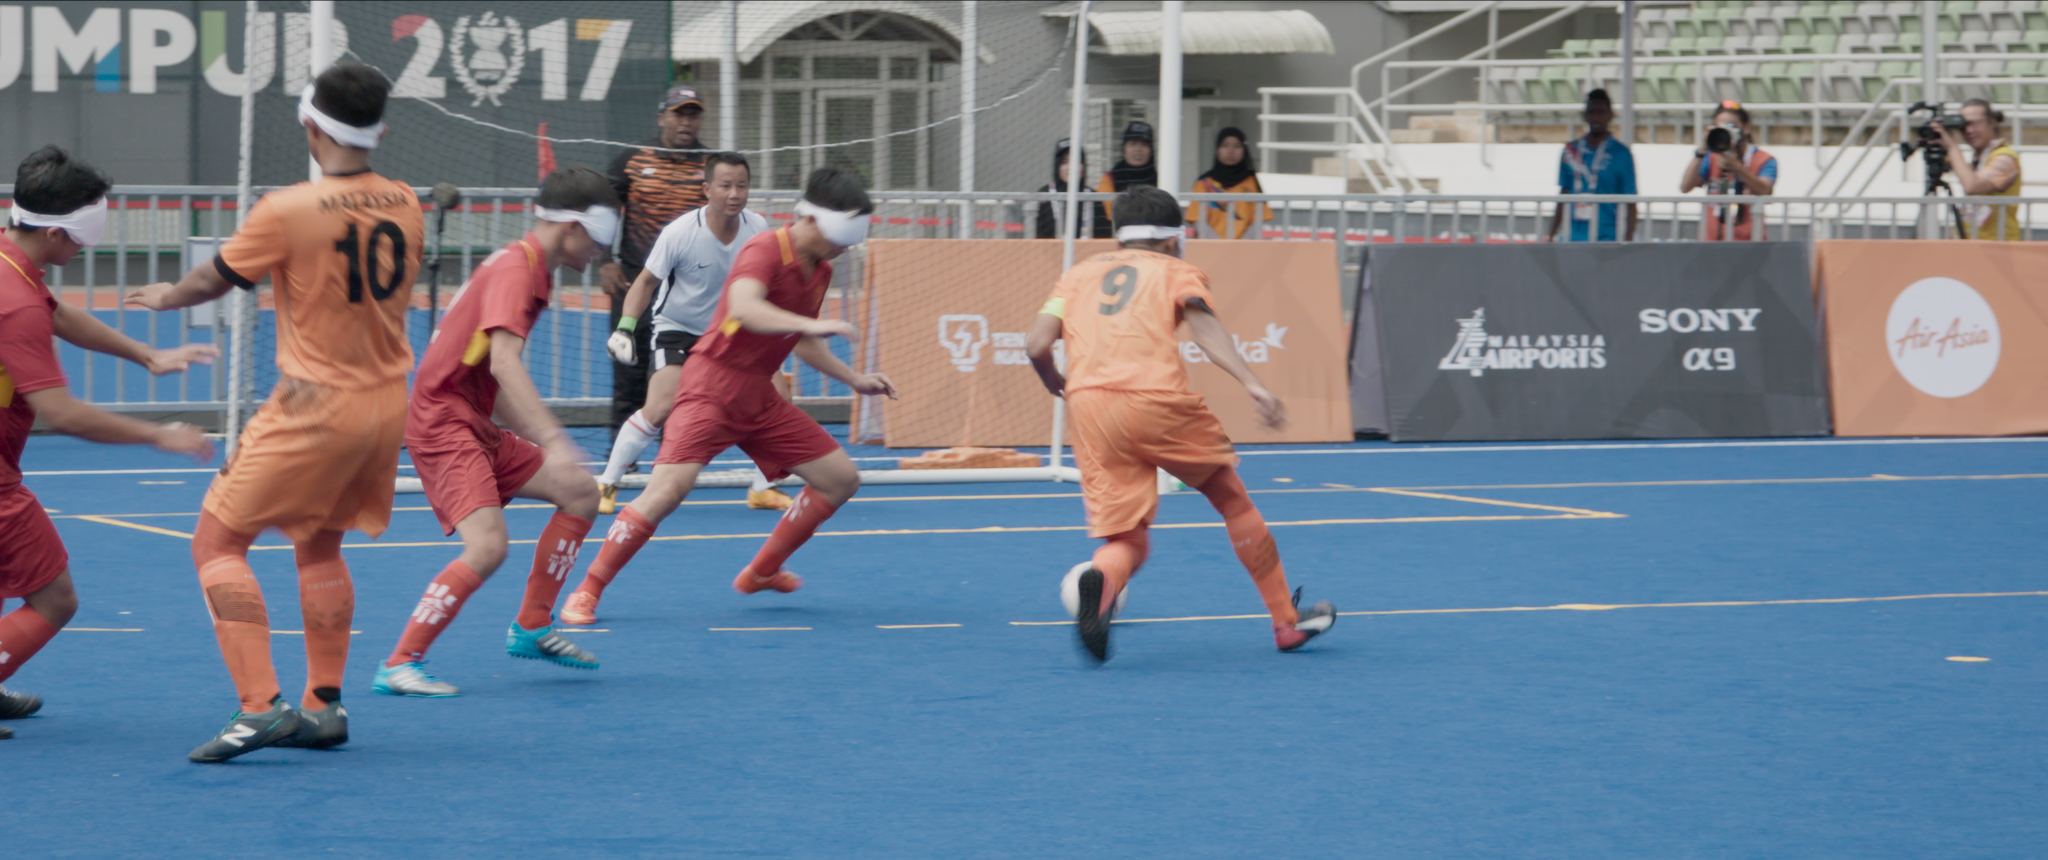 The Malaysian blind football team competing at the Asean Para Games in Kuala Lumpur in 2017. Photo: Handout